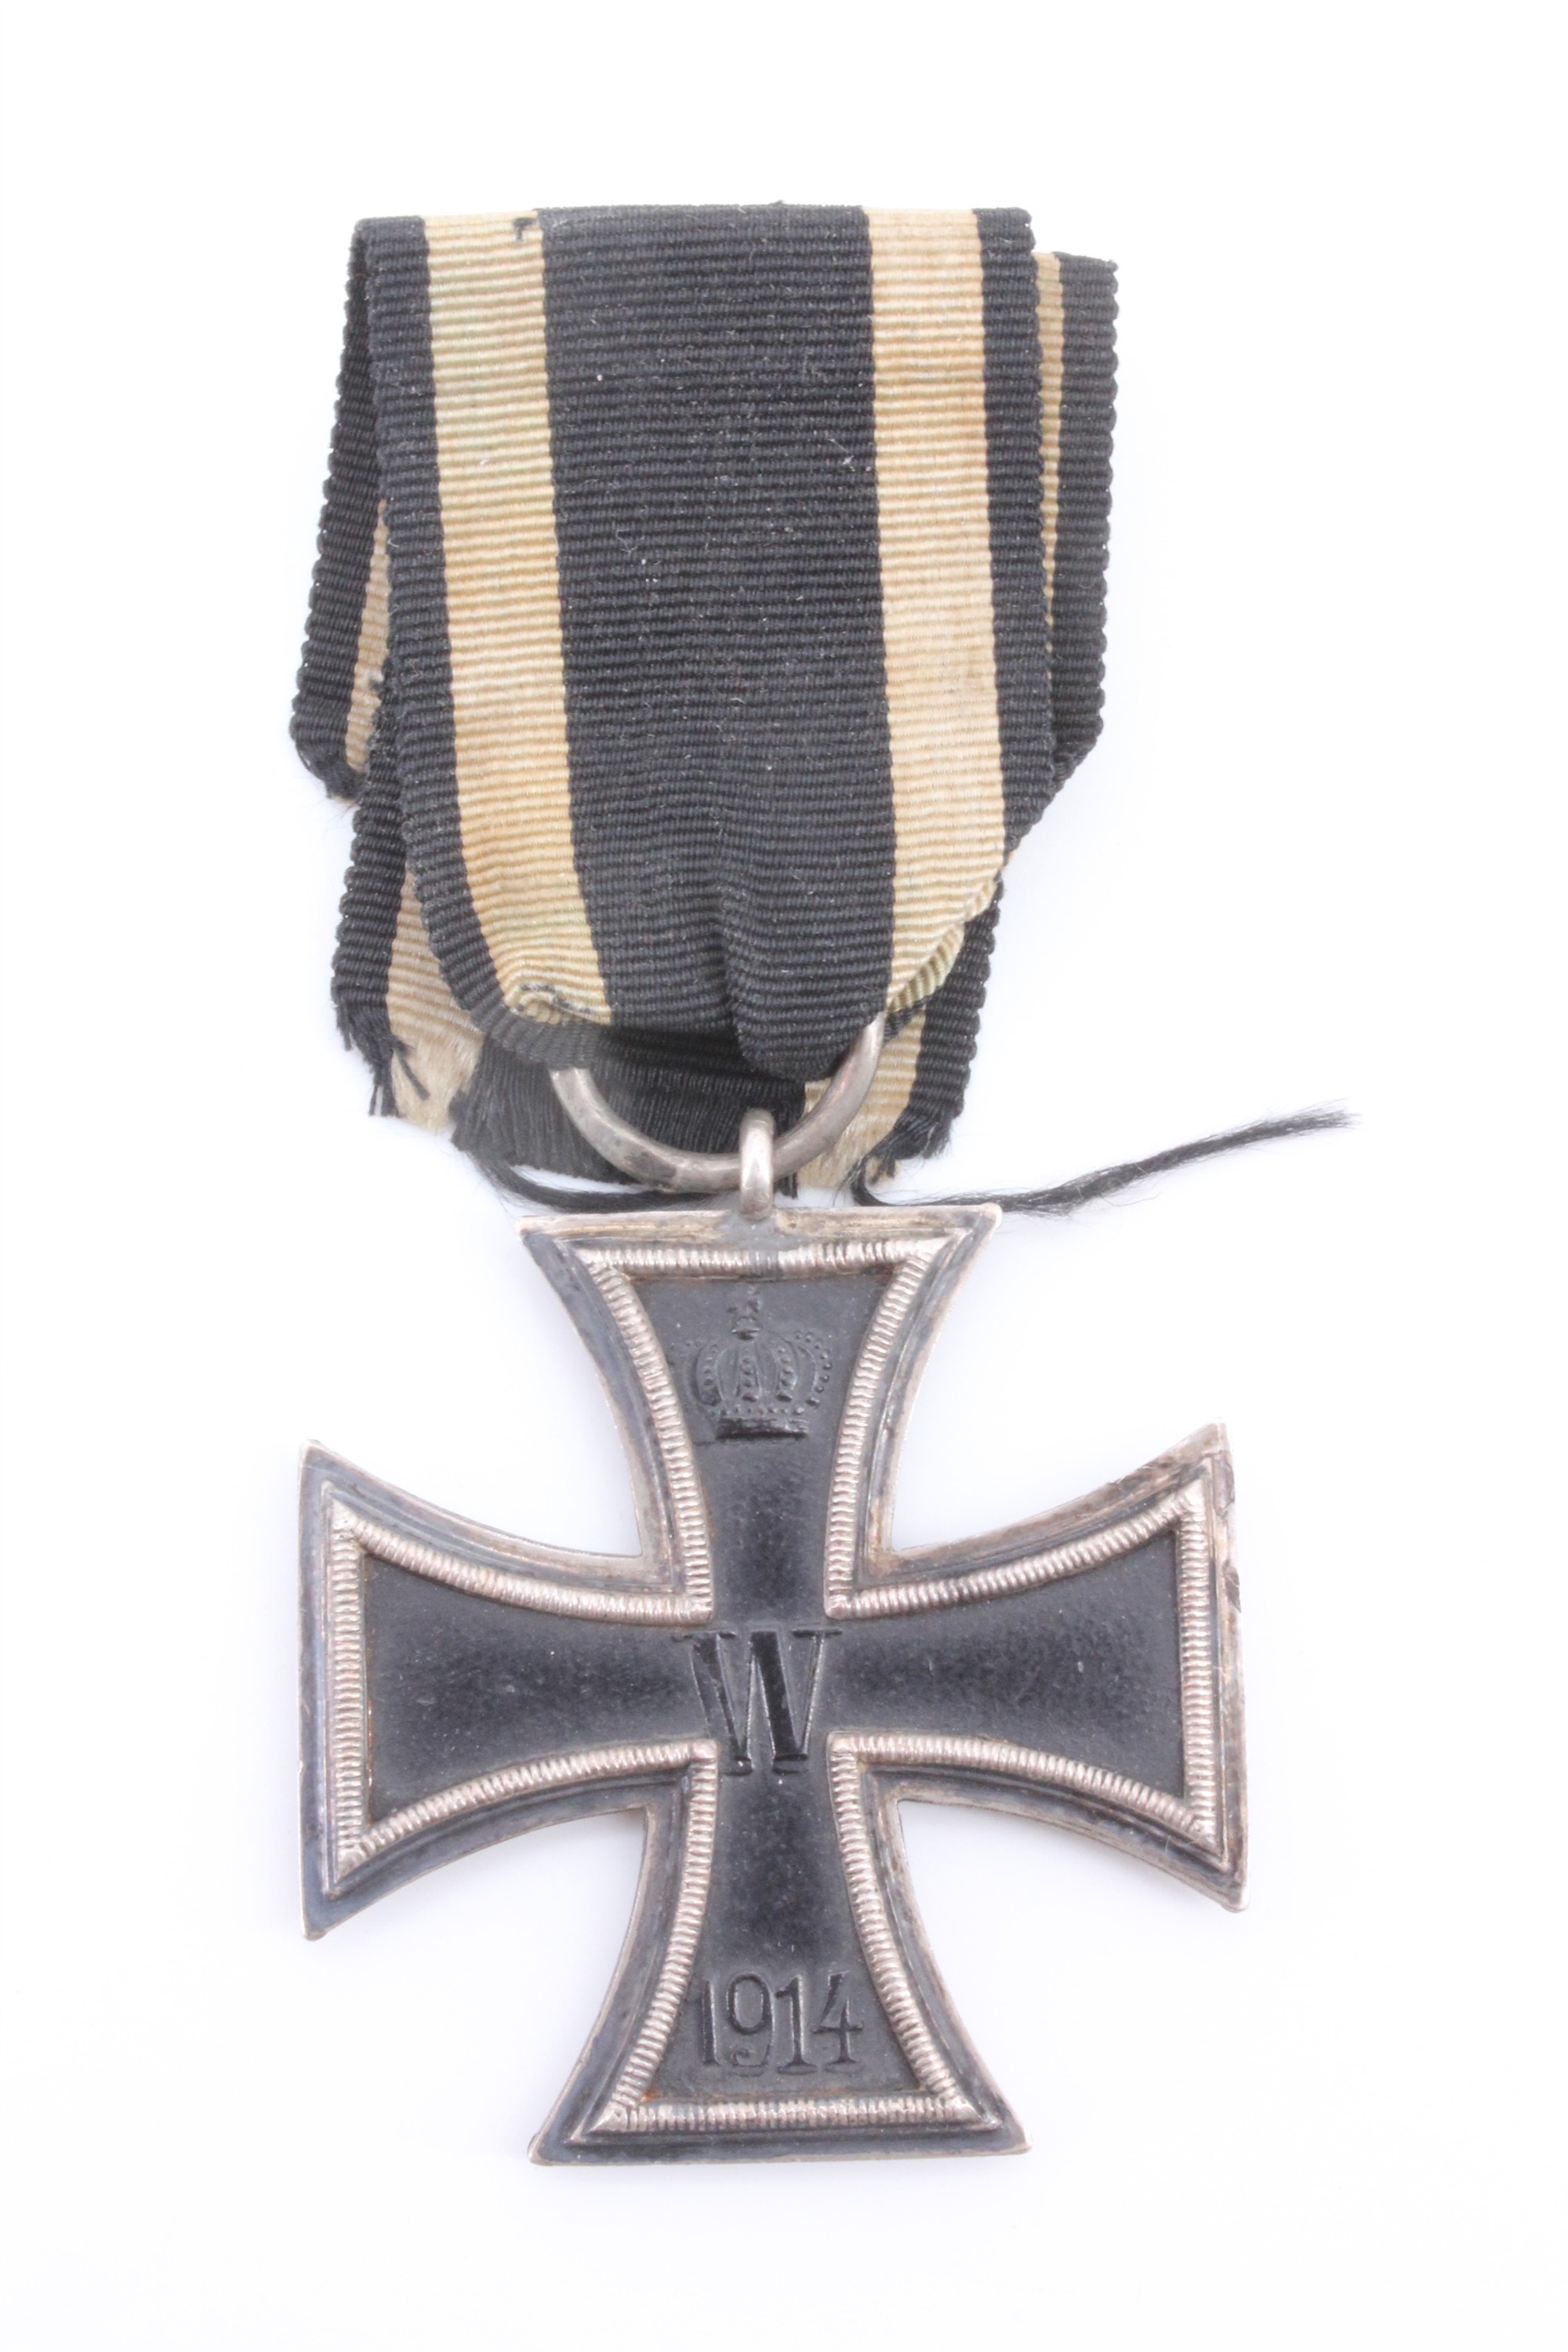 An Imperial German 1914 Iron Cross second class, its ring stamped with indistinct initials and an